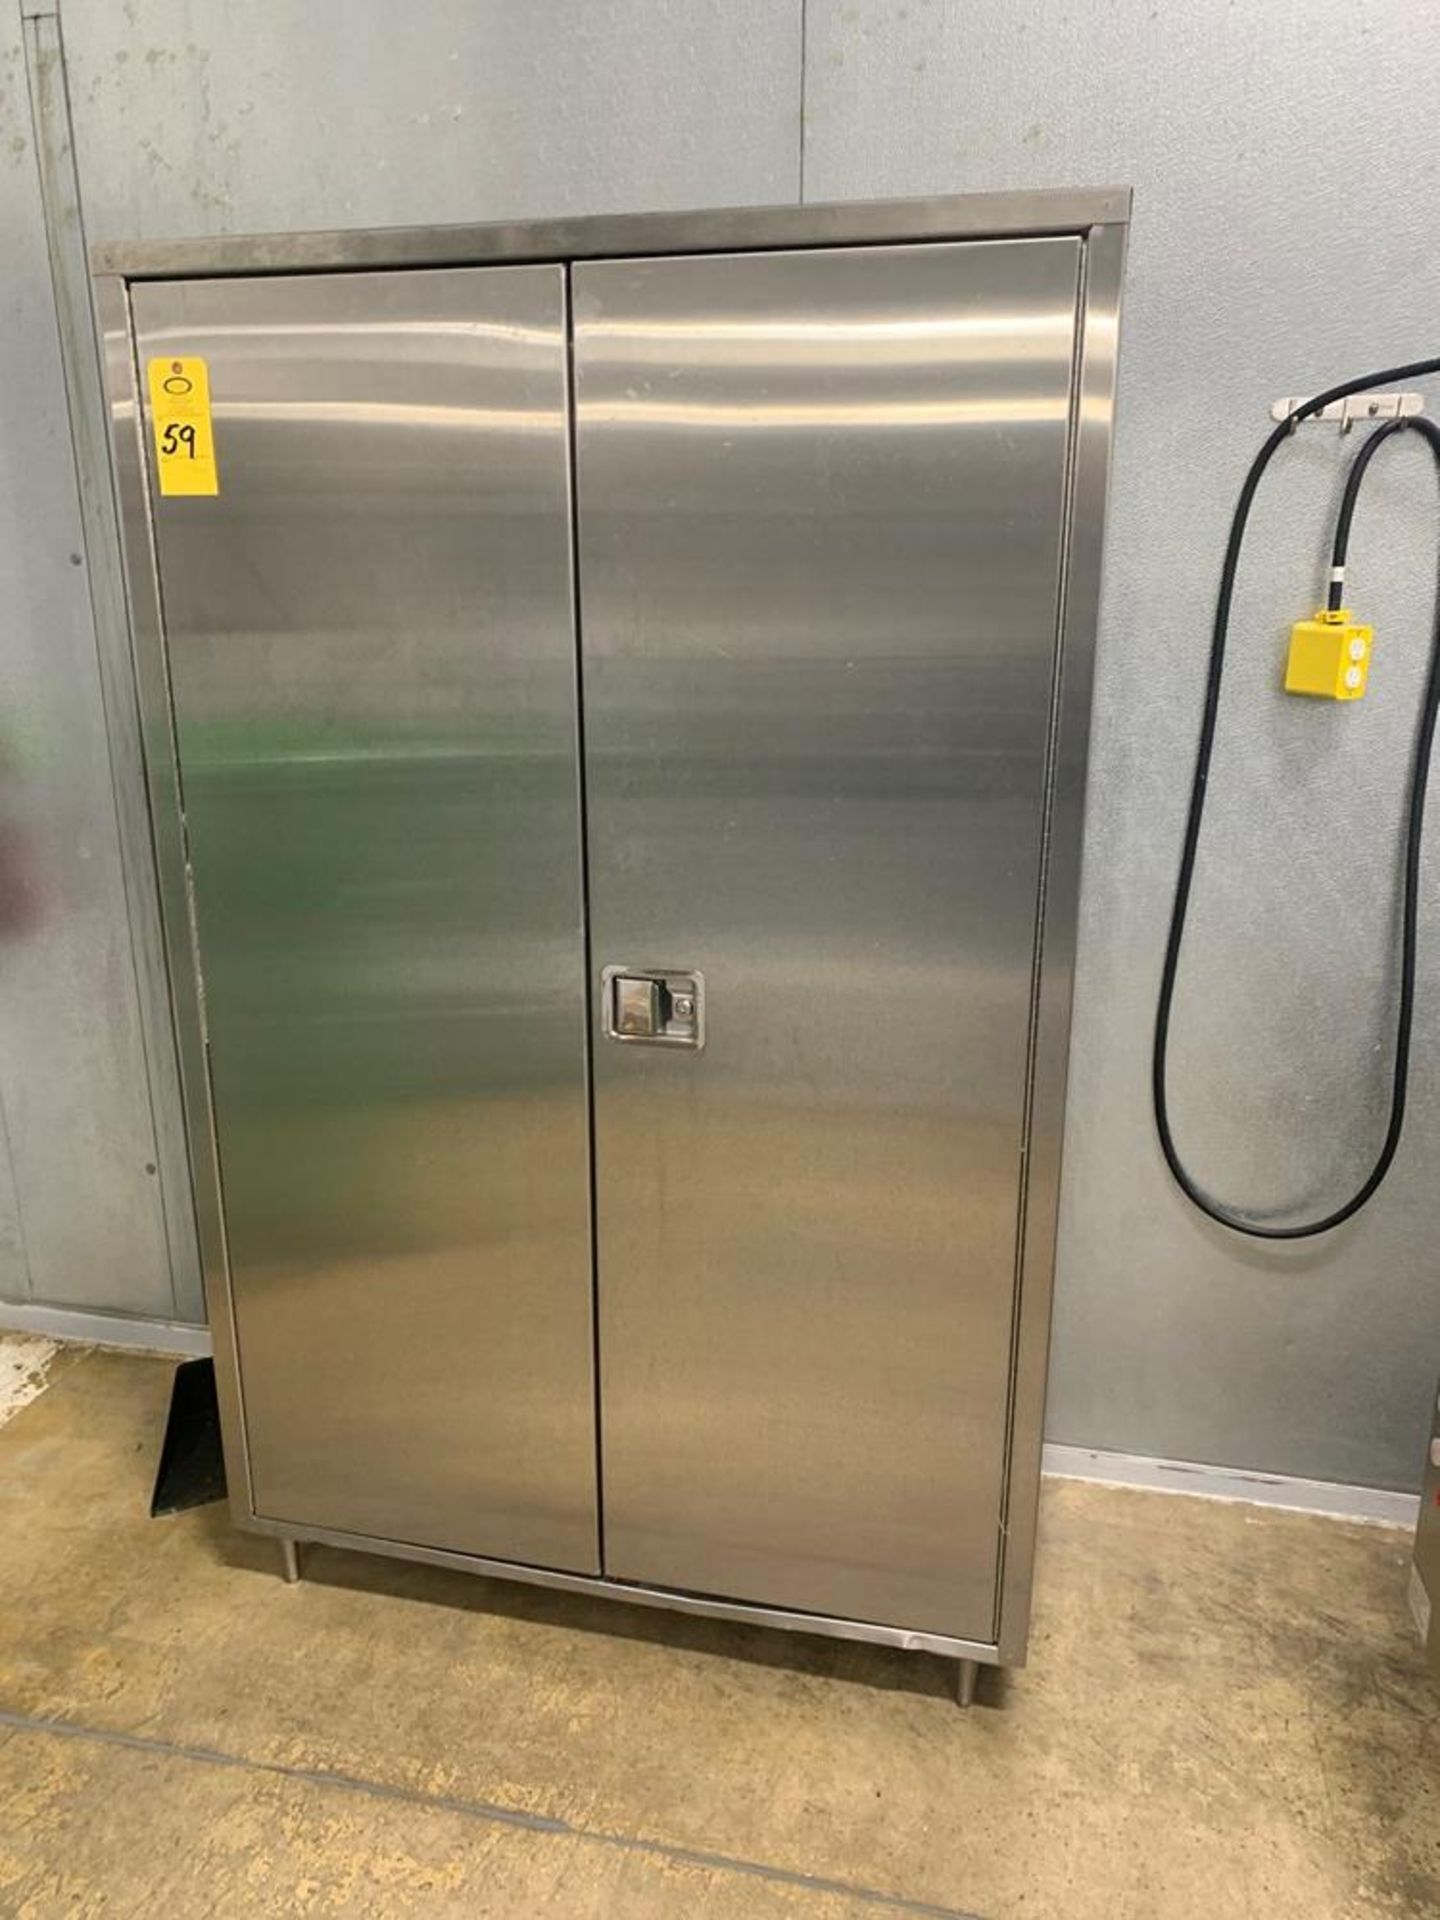 Stainless Steel 2-Door Cabinet, 48" X 24" X 72" tall (Required Loading Fee: $25.00) NO HAND CARRY (